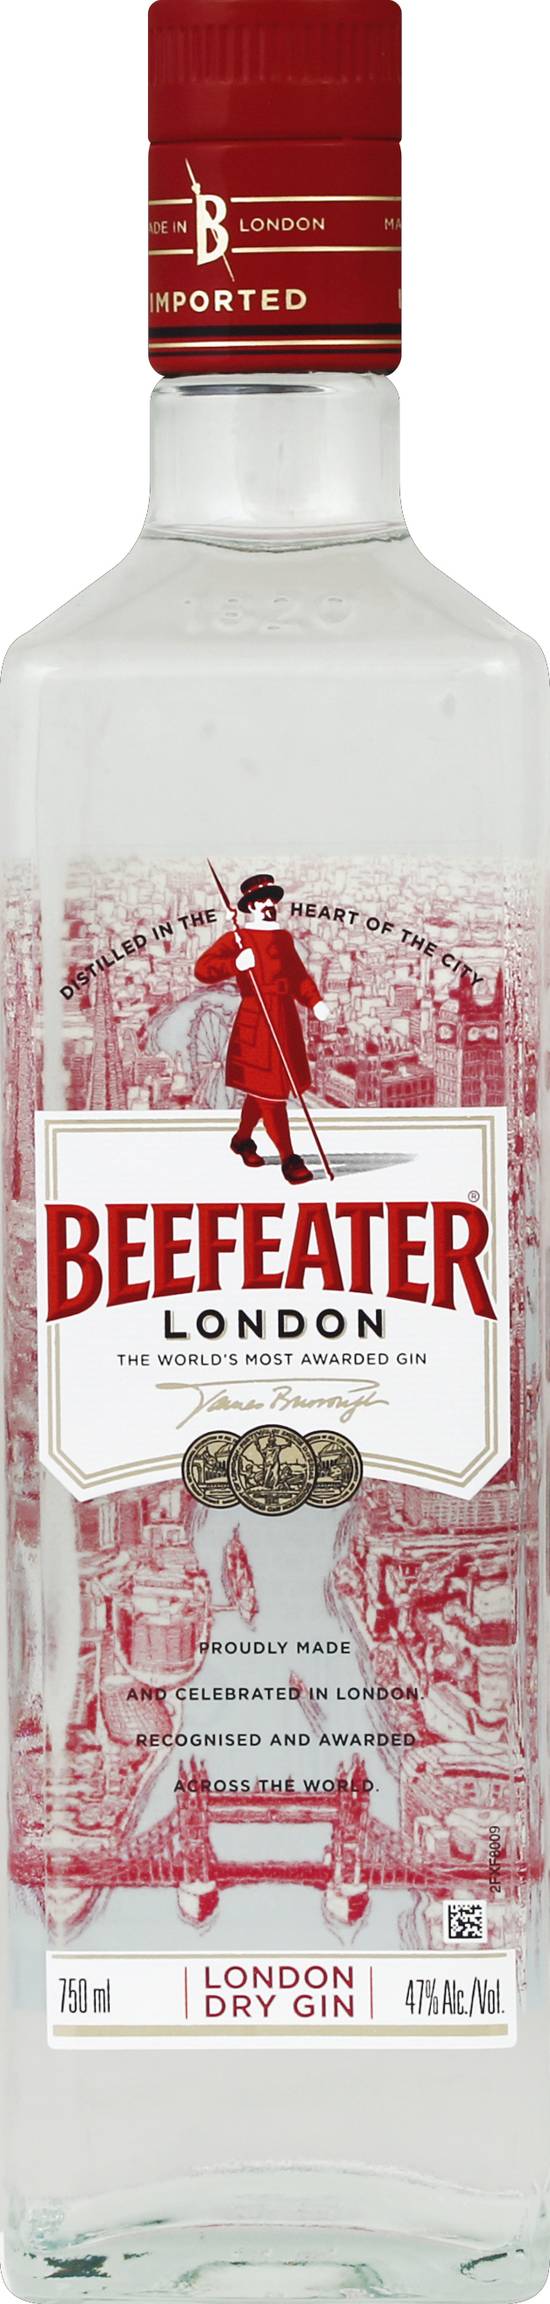 Beefeater London Dry Gin (750 ml)